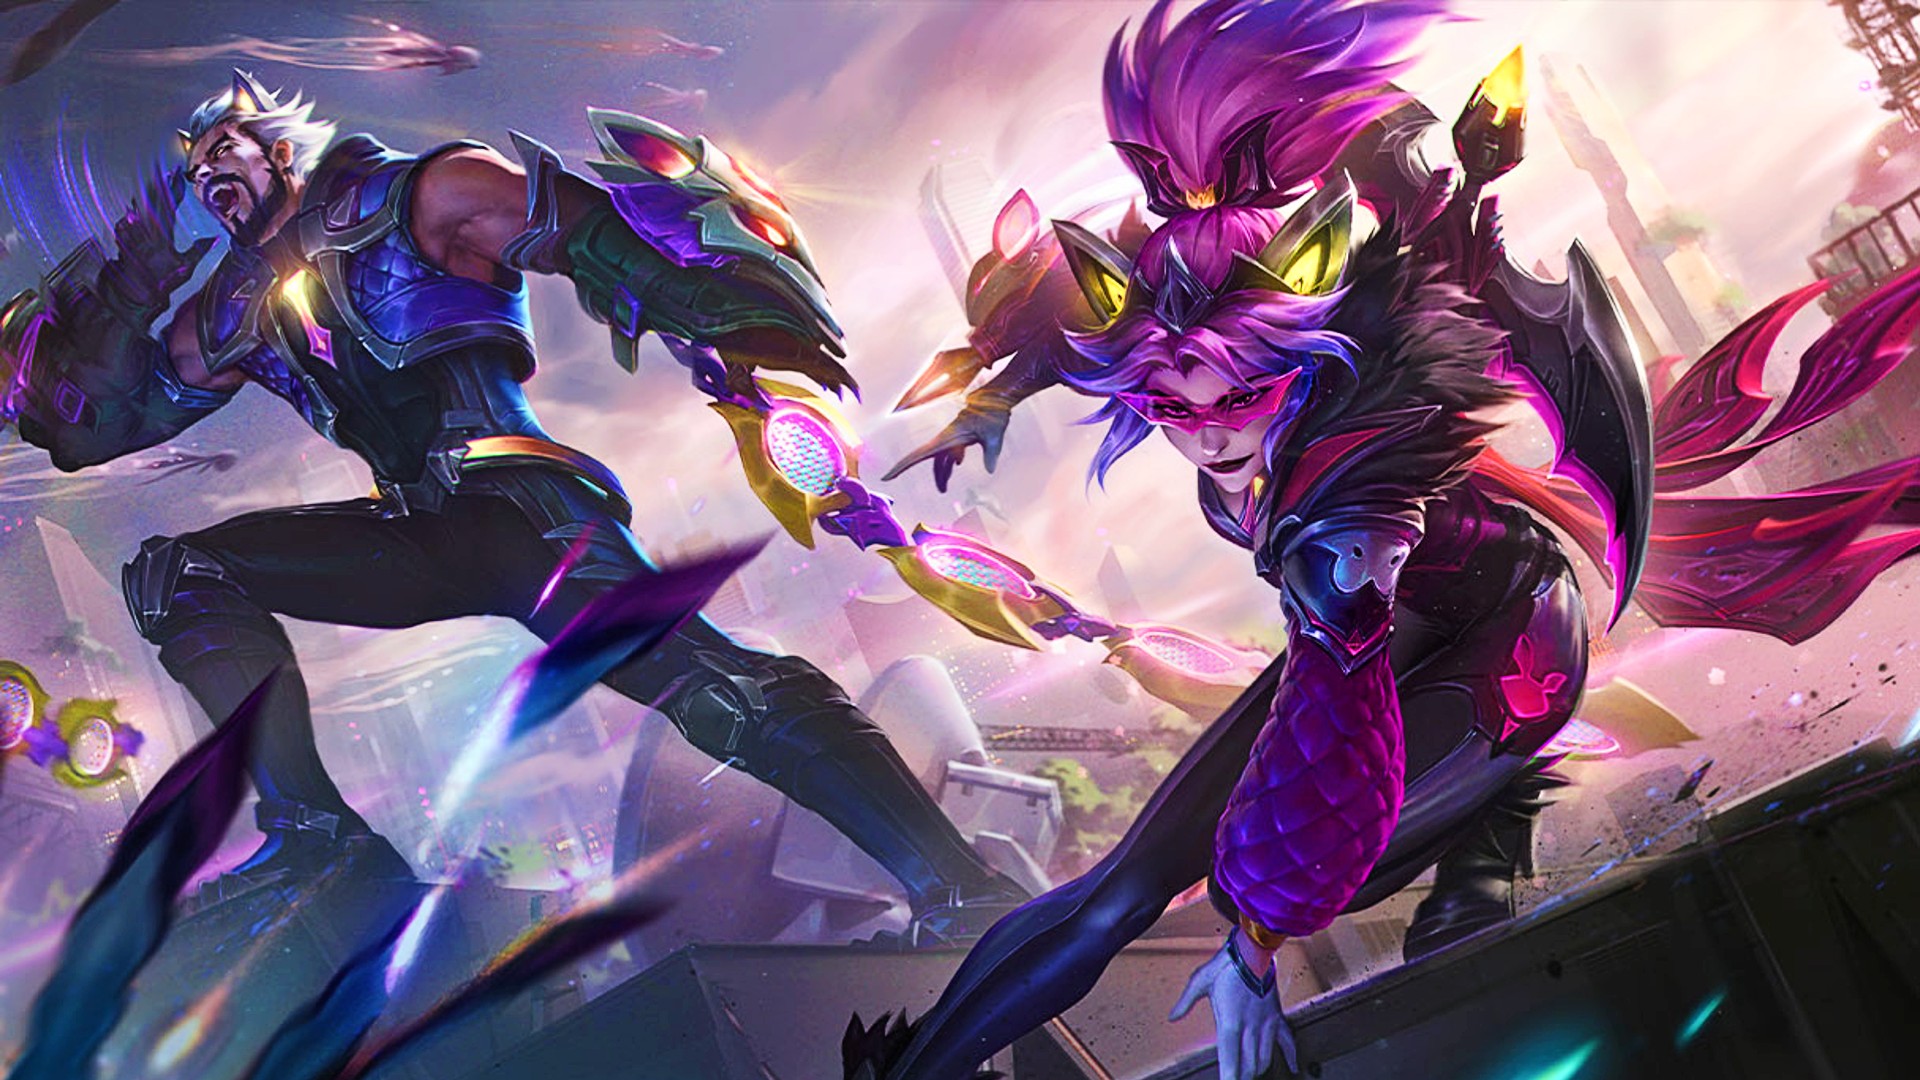 Prime Gaming League of Legends Loot for March 2023 - Free LoL skins and more